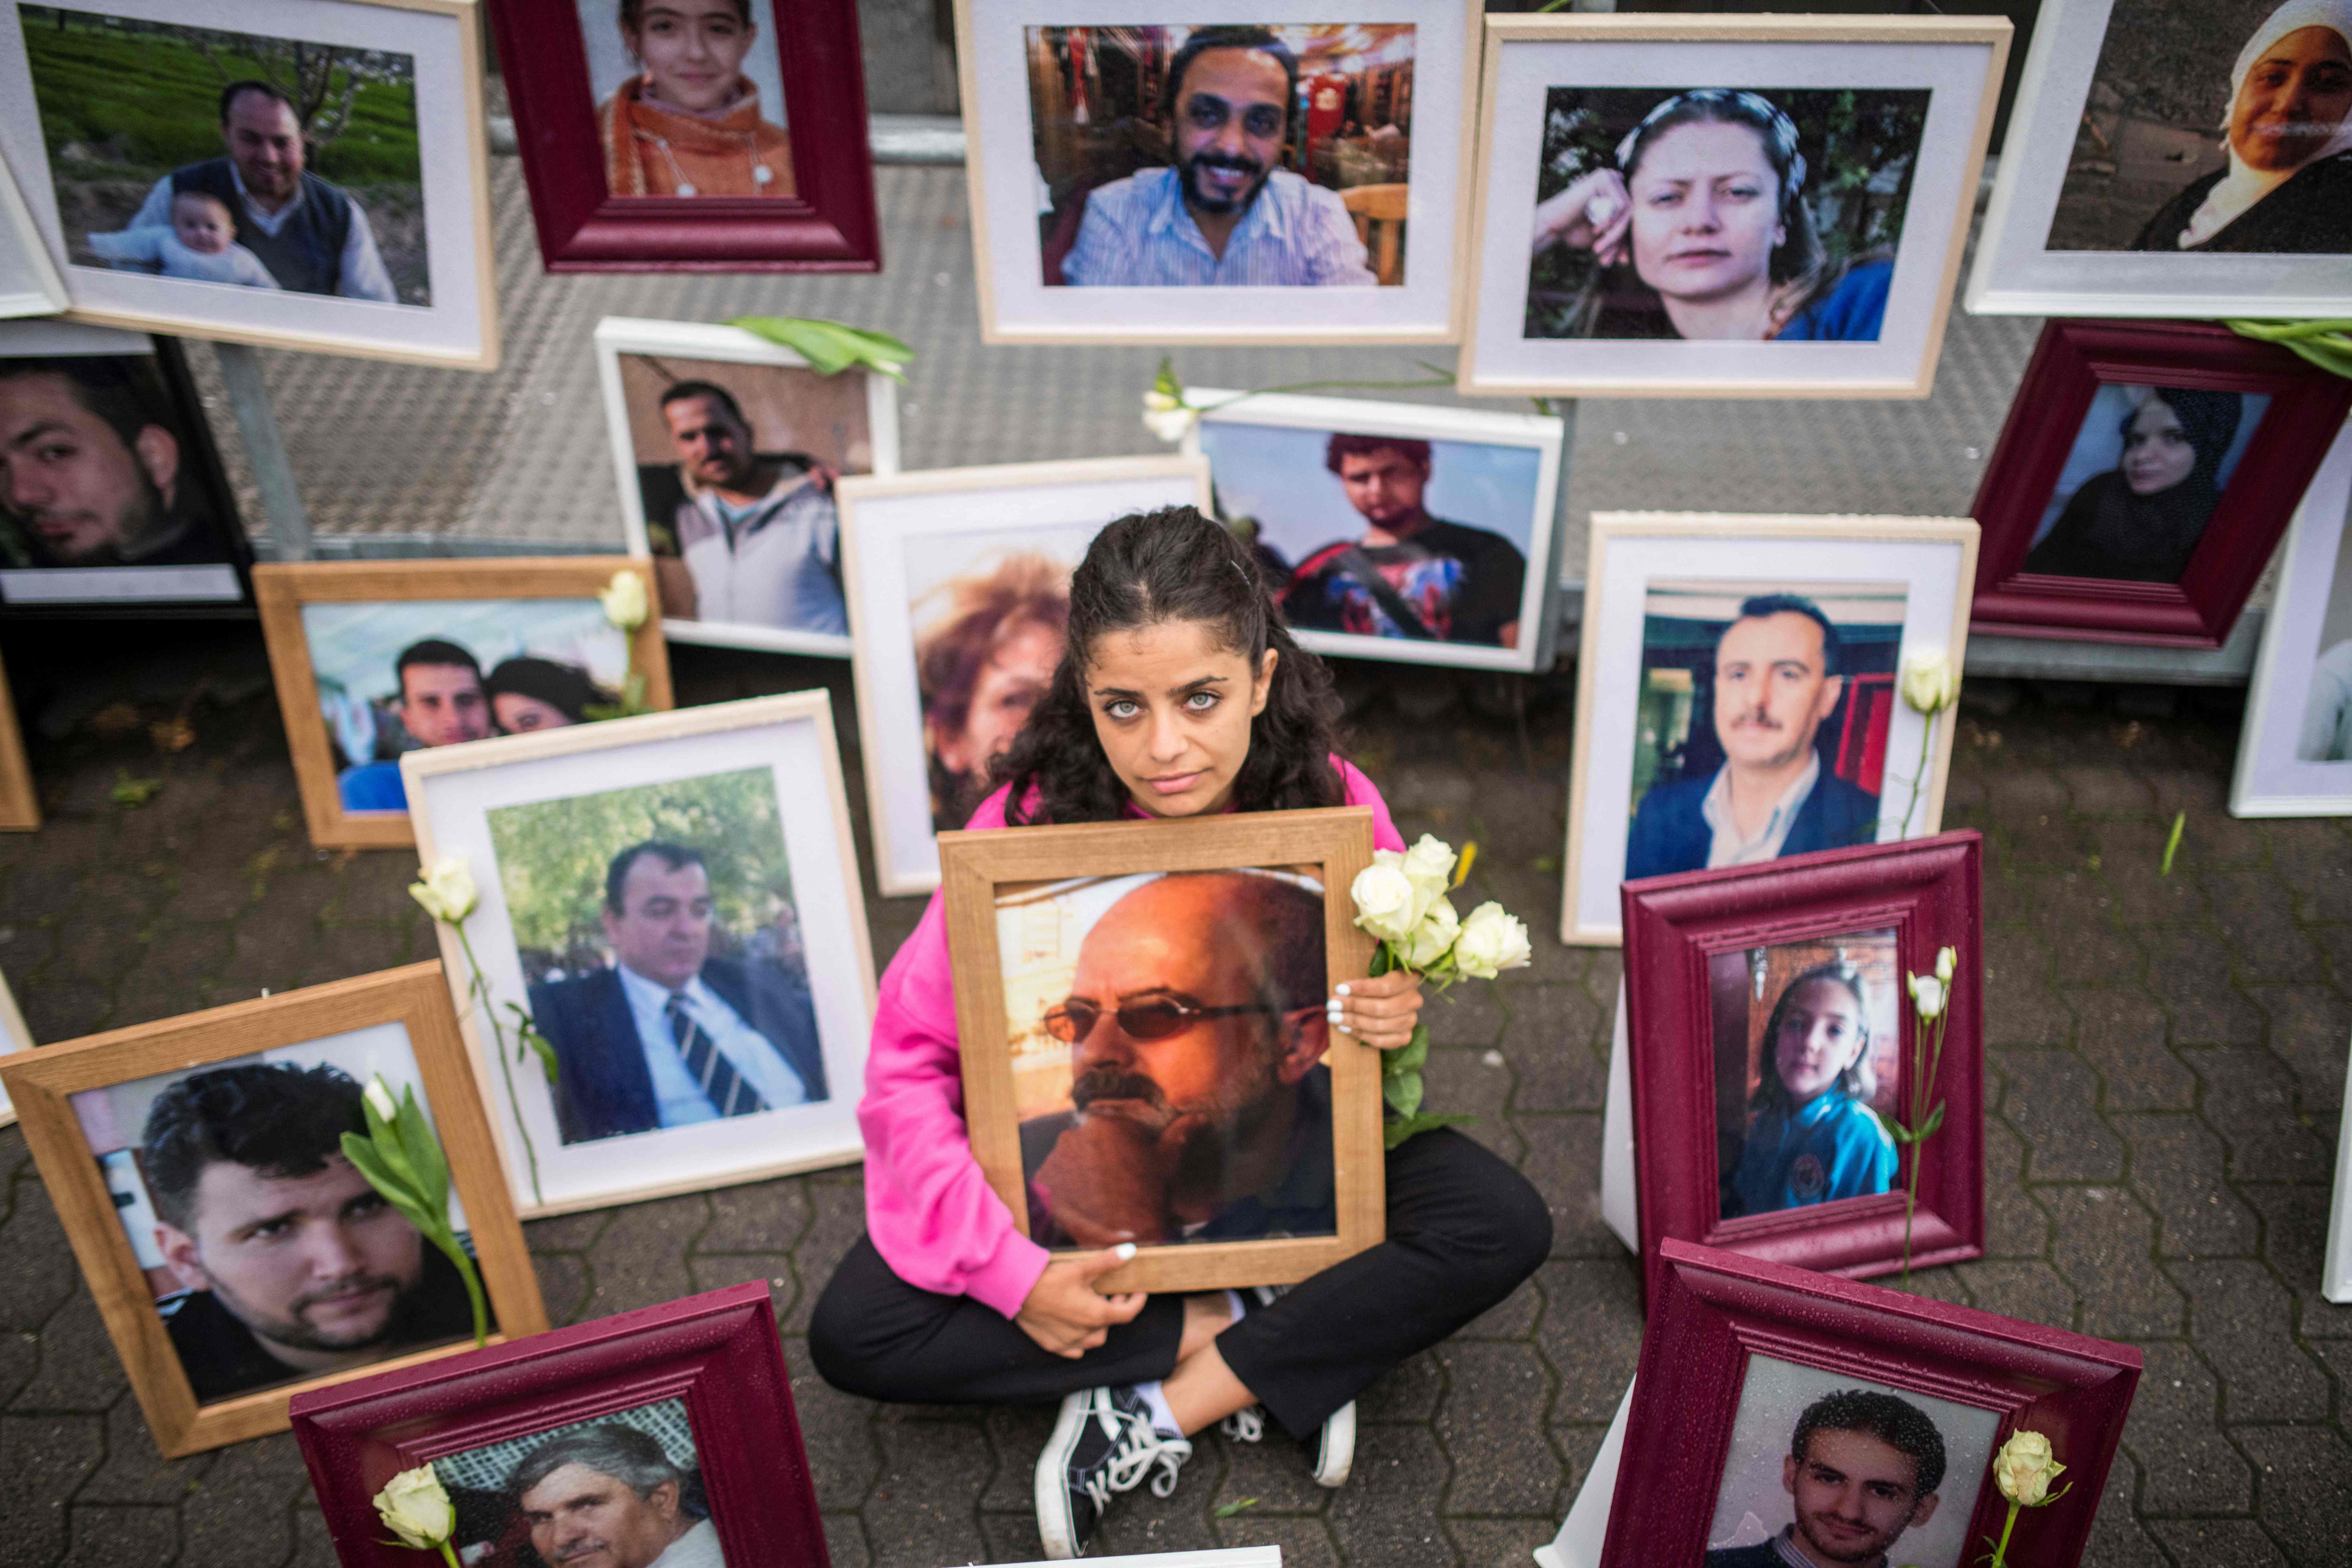 File photo: Syrian campaigner Wafa Mustafa sits between pictures of victims of the Syrian regime in Koblenz, western Germany, 4 June 2020